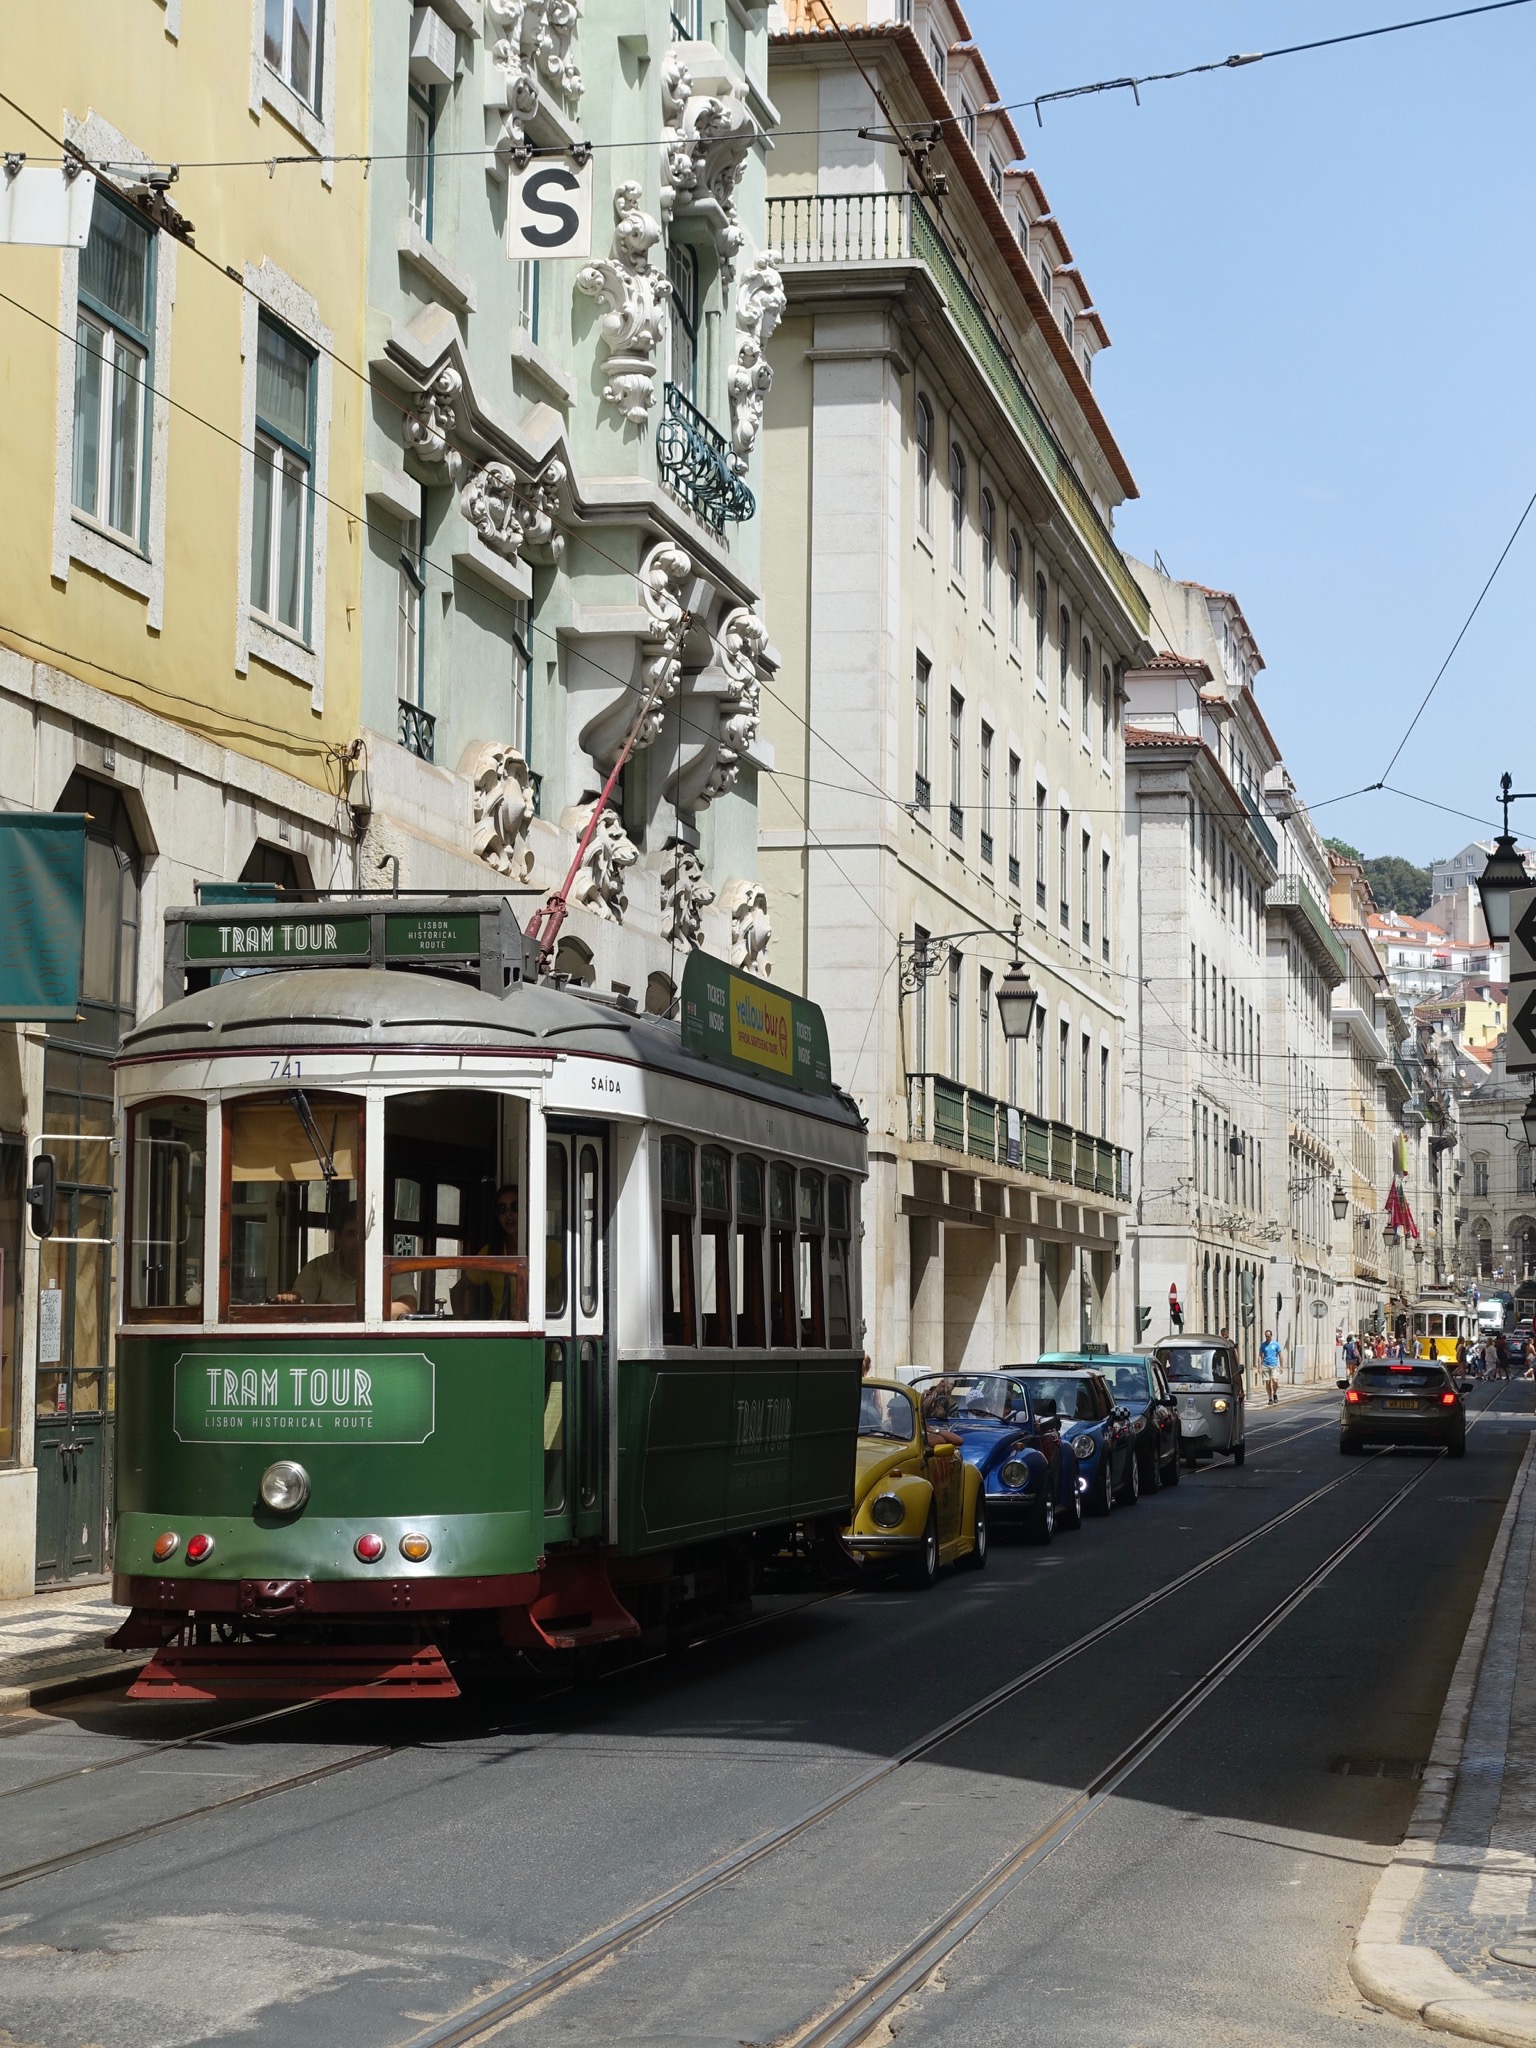 Photo 55 of 86 from the album Highlights Lisbon 2015.